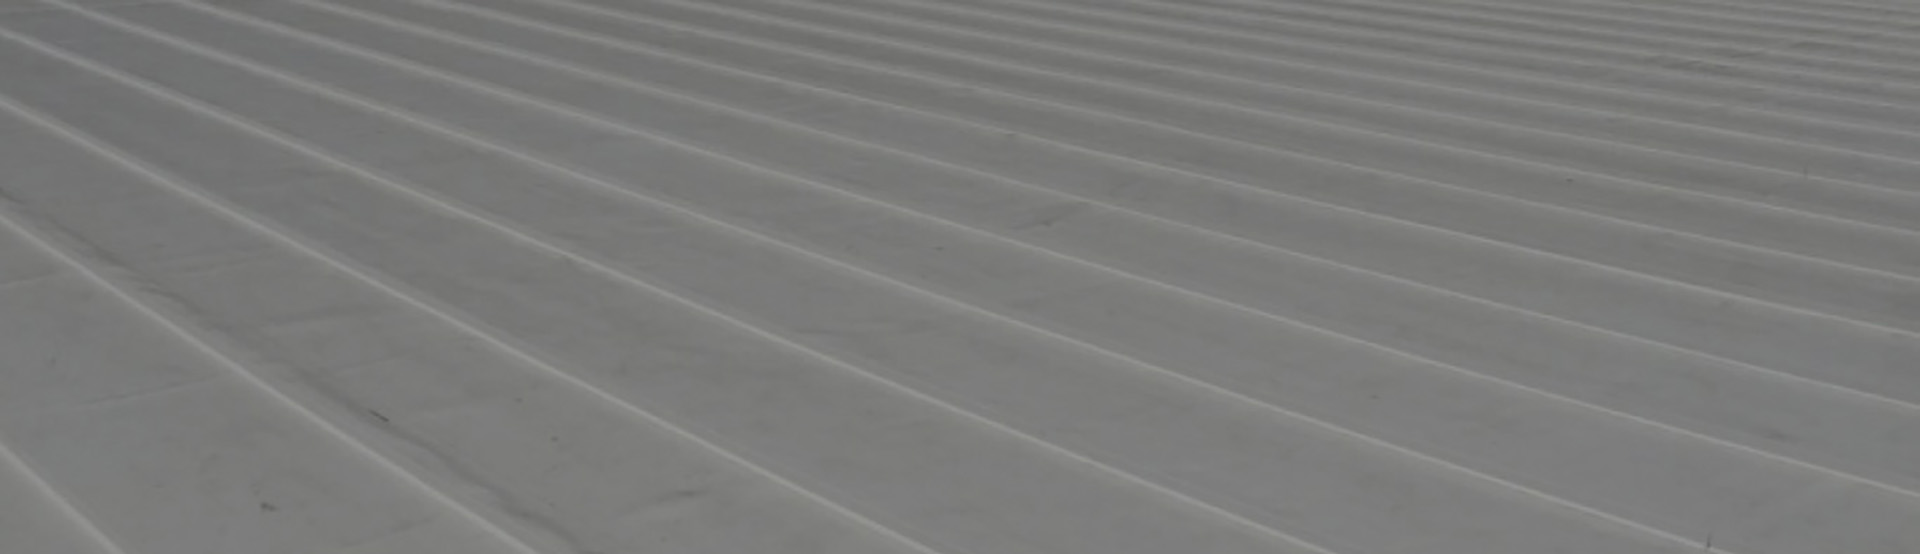 Roof de-icing for membrane roofs banner